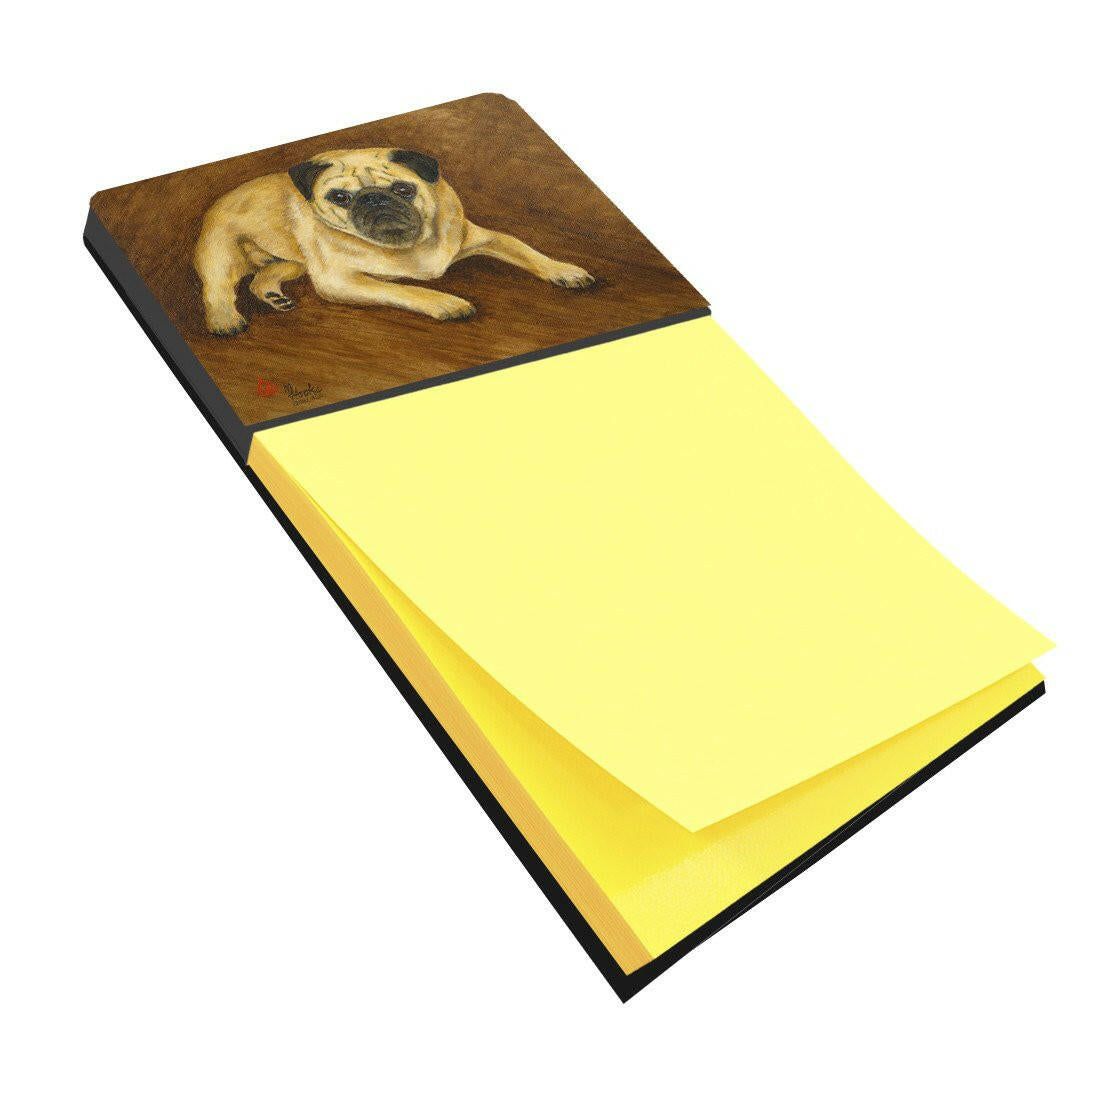 Fawn Pug Roscoe Sticky Note Holder MH1062SN by Caroline's Treasures